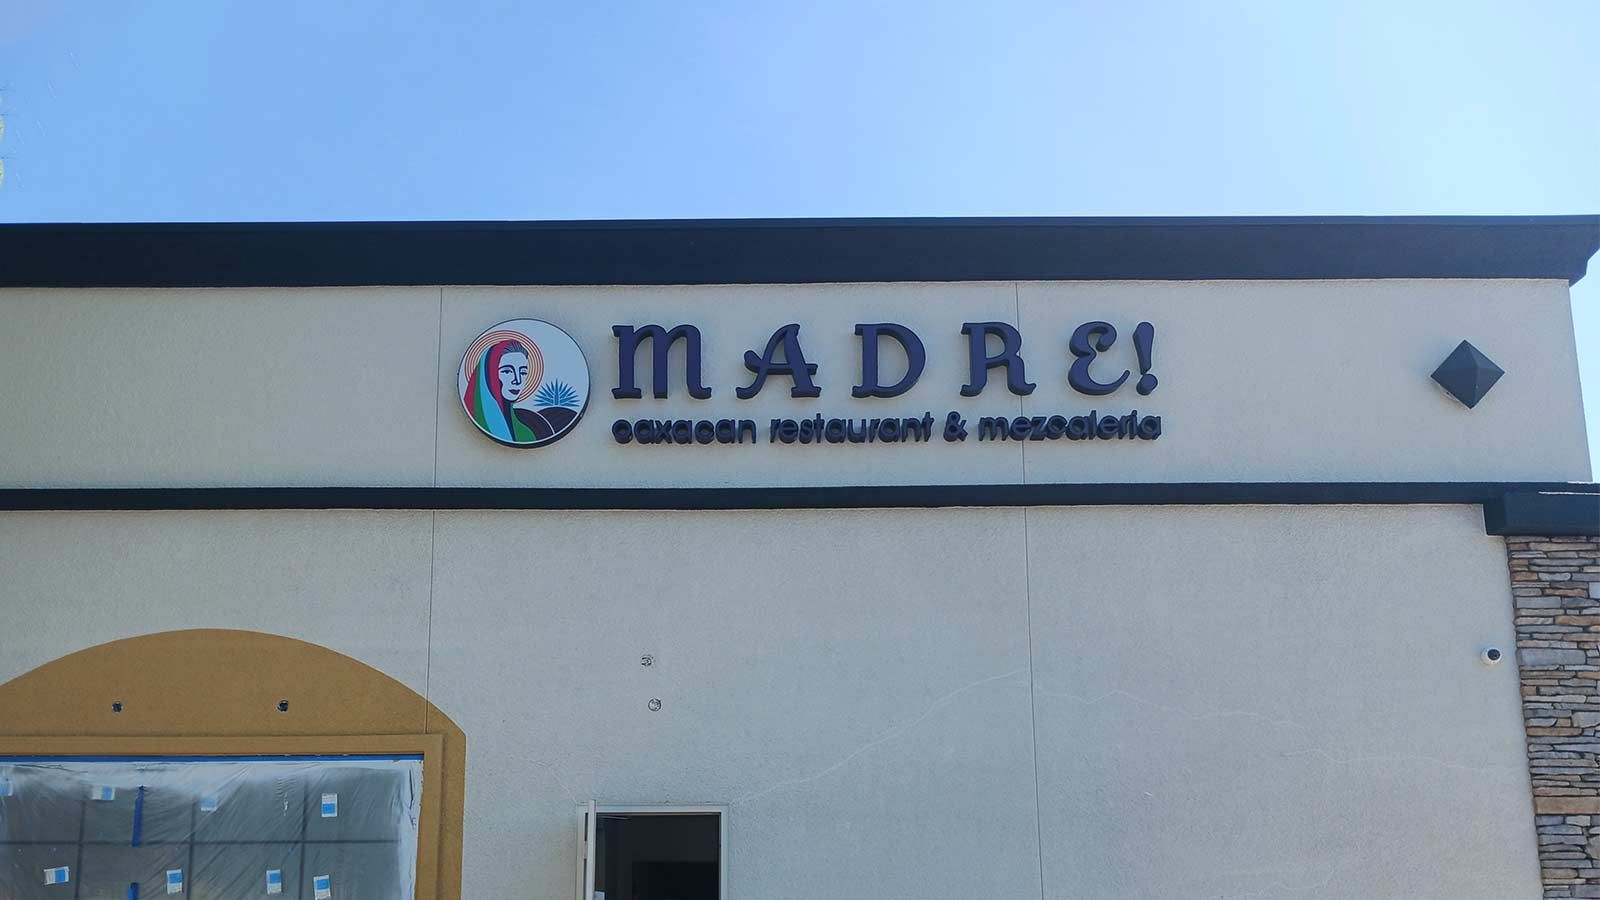 Madre channel letters mounted on the building